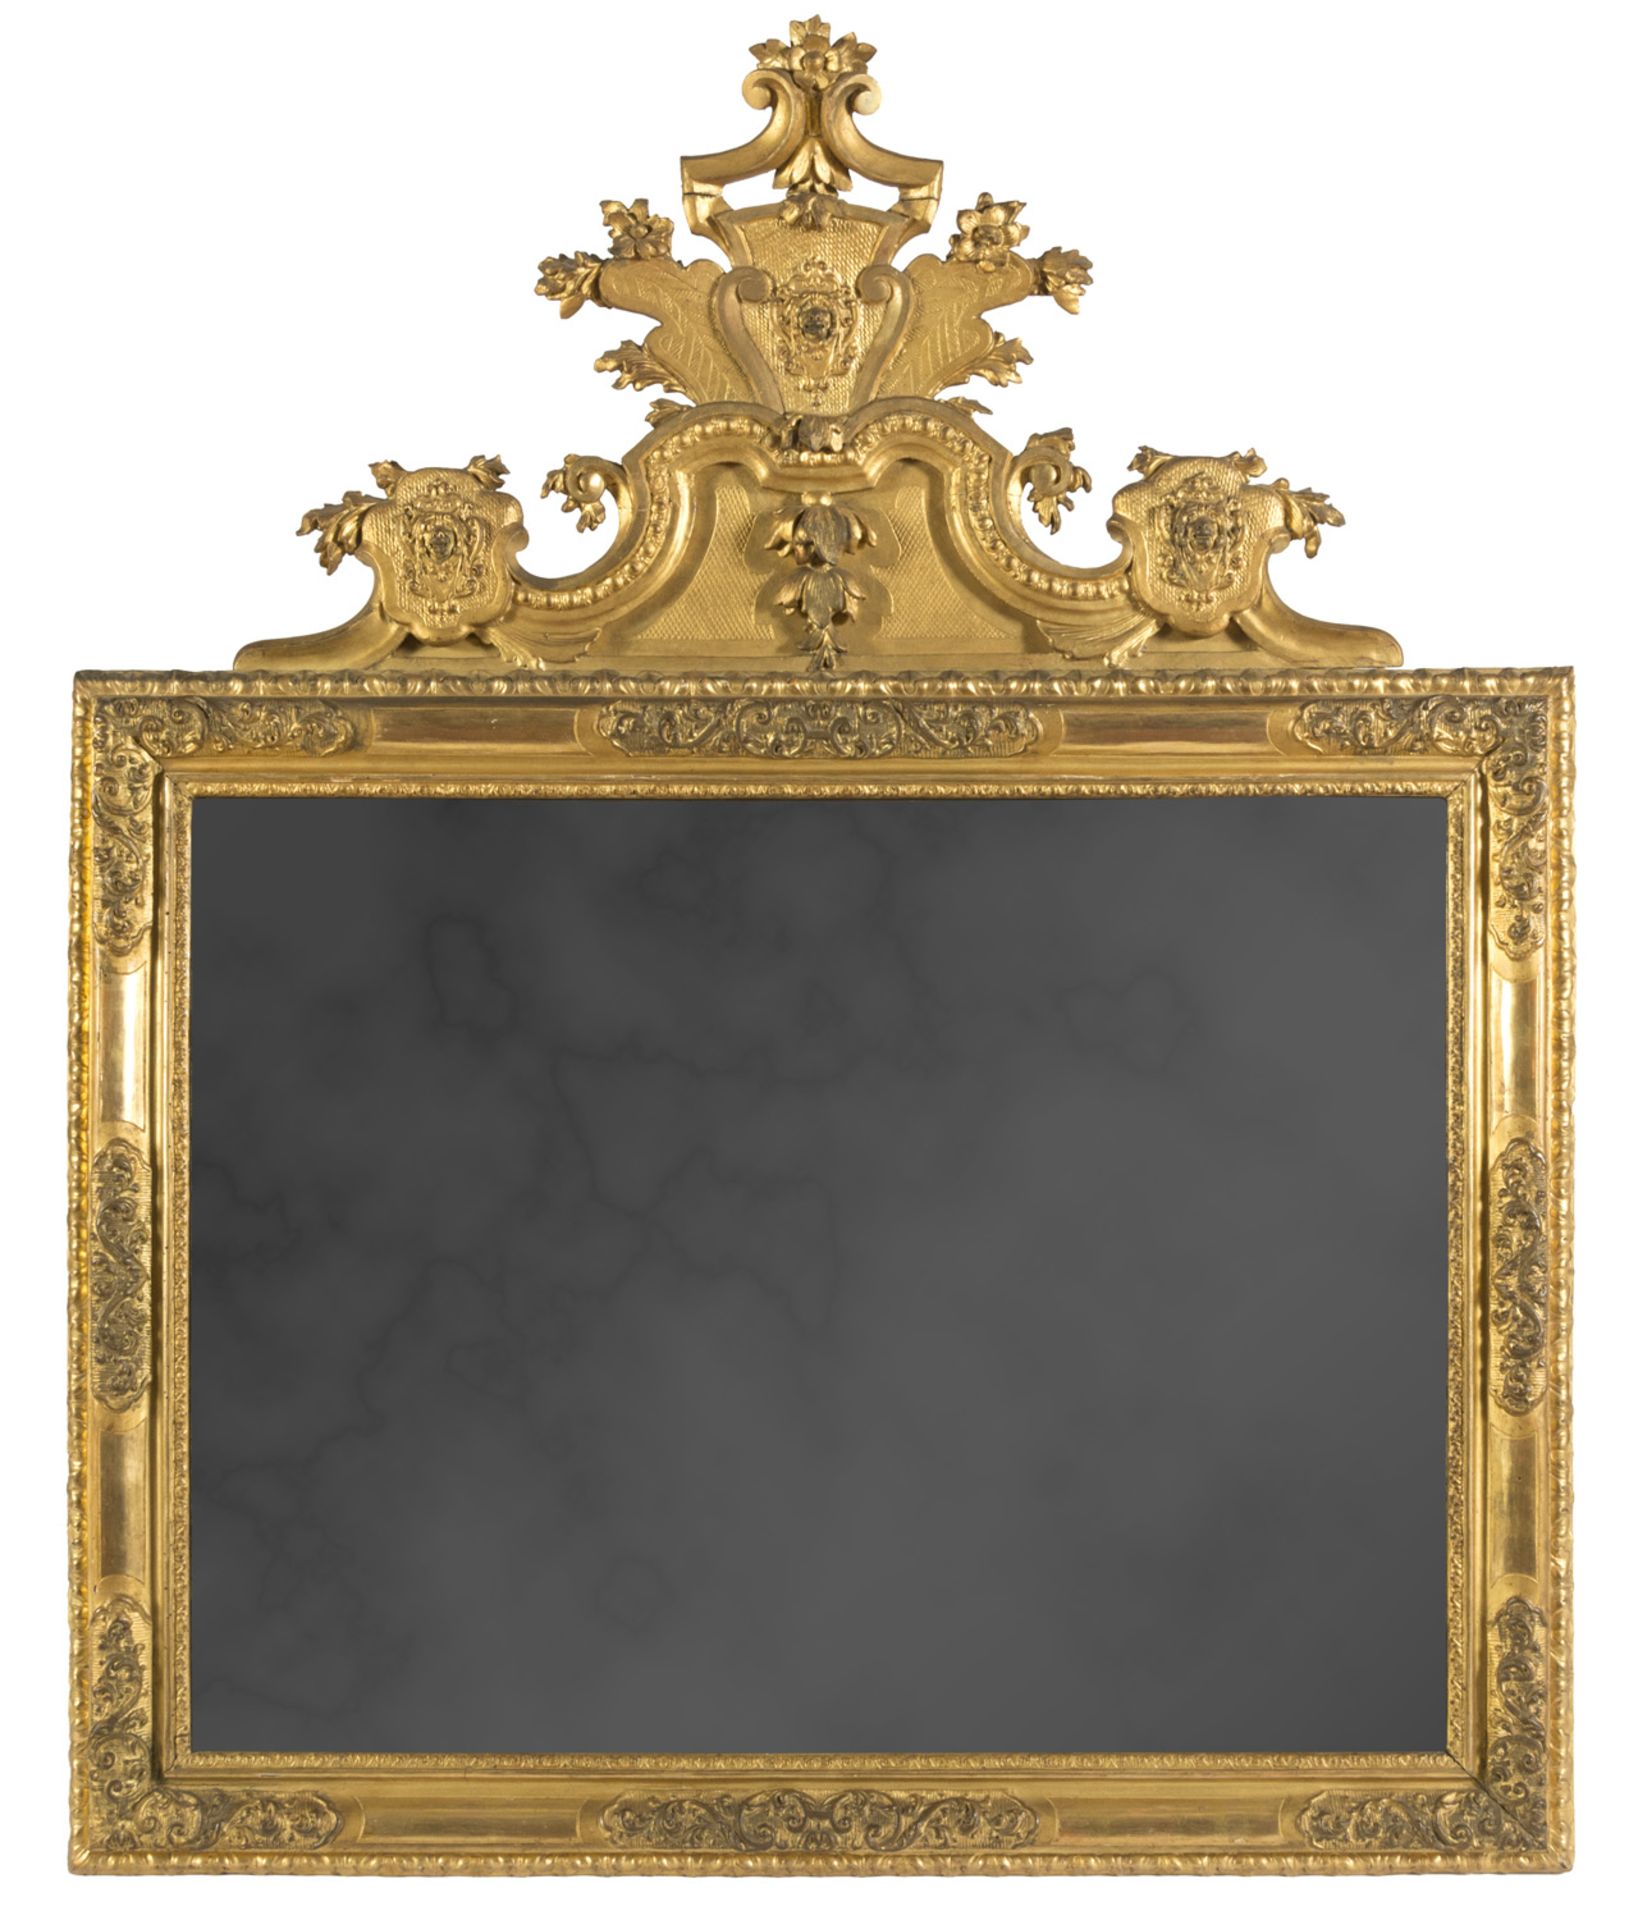 BEAUTIFUL GILTWOOD MIRROR, VENICE SECOLO in red bolus, frame carved into small spiral, leaves and